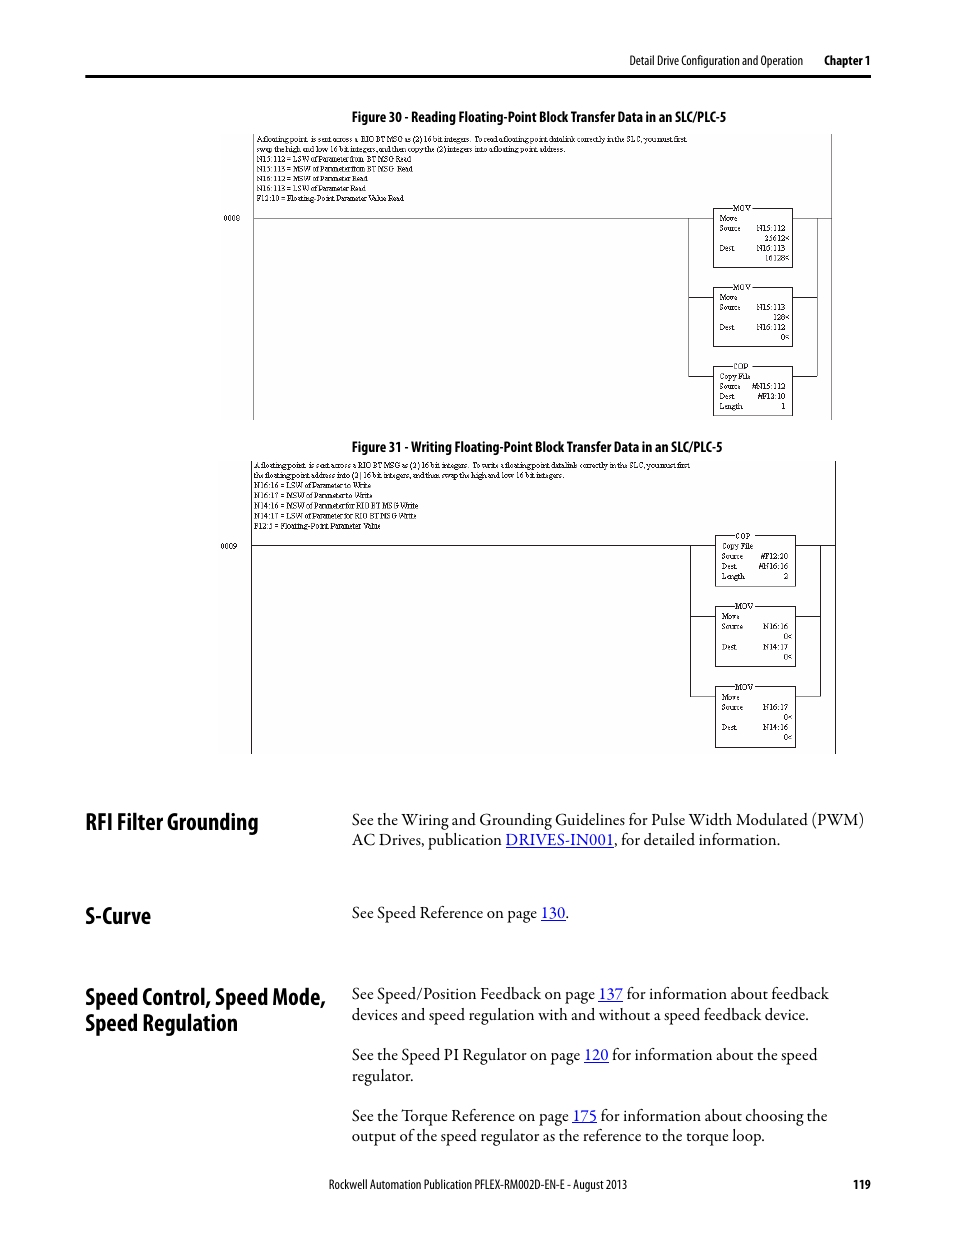 Rfi filter grounding, S-curve, Speed control, speed mode, speed regulation | Rockwell Automation 20D PowerFlex 700S with Phase I Control Reference Manual User Manual | Page 119 / 190